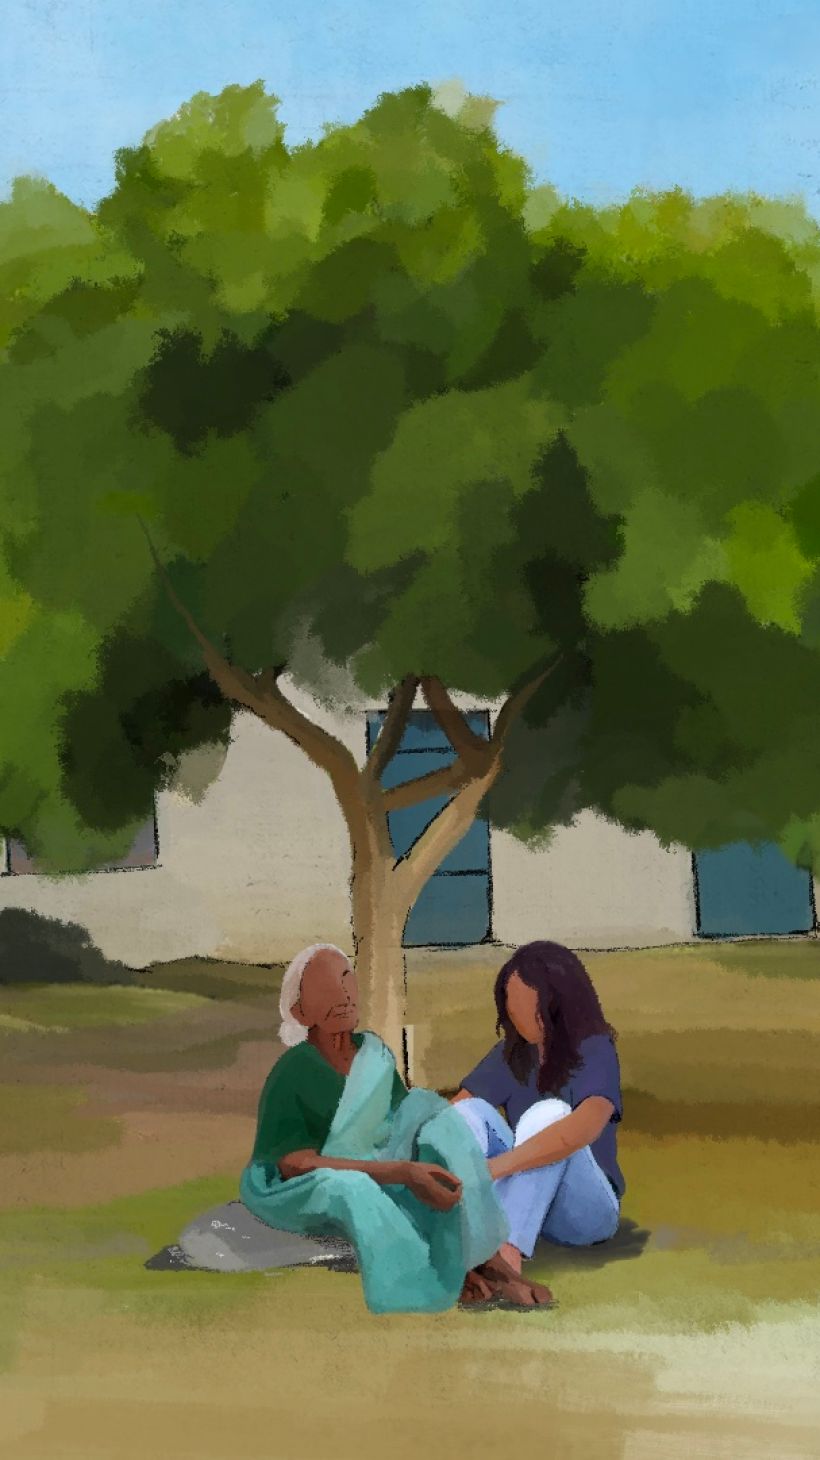 An illustration of two people sitting in the grass a park, knee to knee.